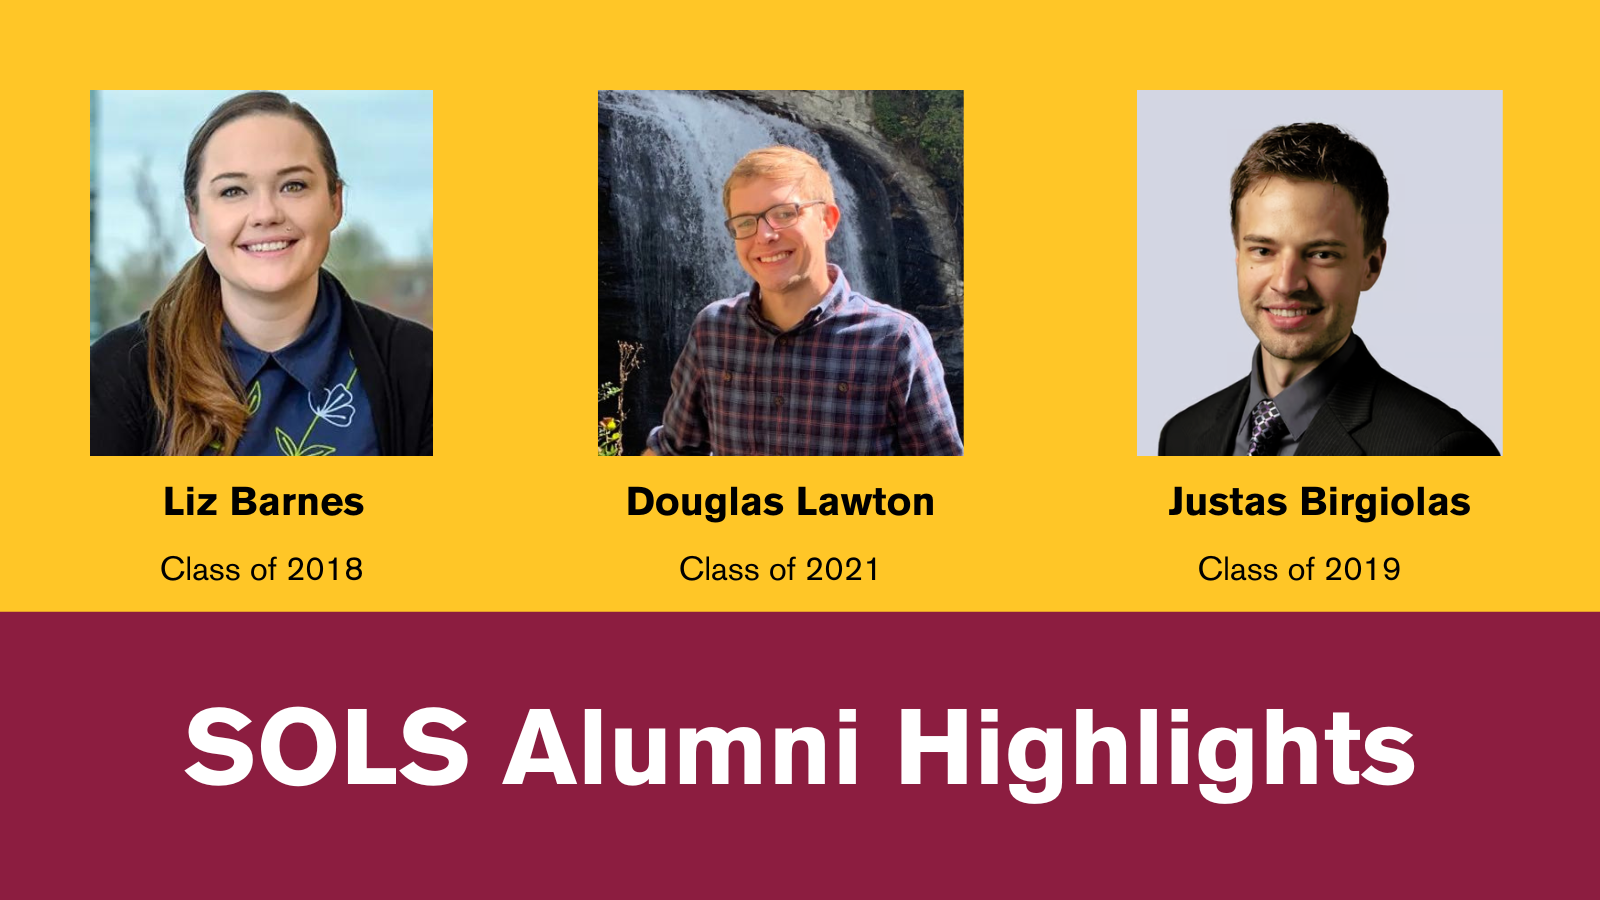 From left to right the alumni showcased in this article are Liz Barnes (Class of 2018), Douglas Lawton (Class of 2021) and Justas Birgiolas (Class of 2019)